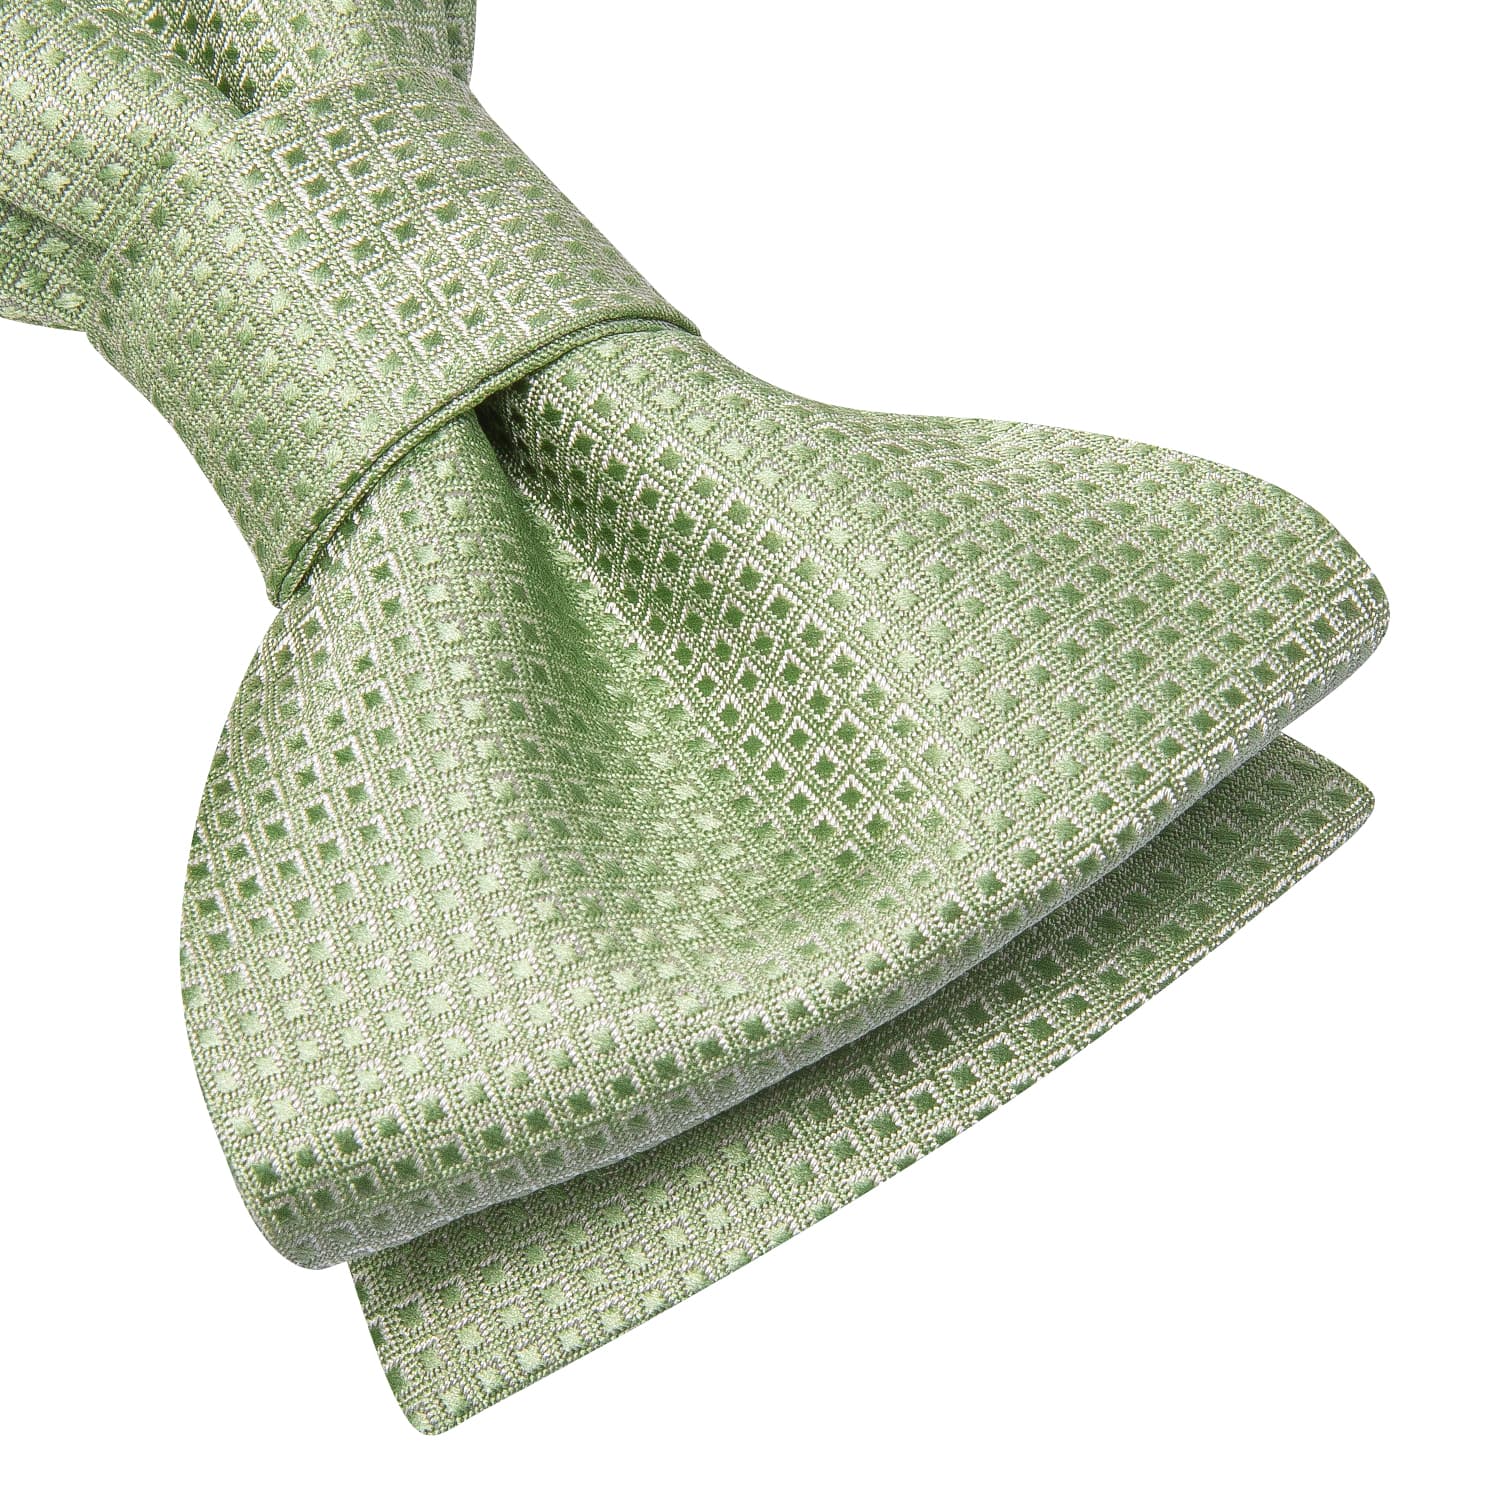 green bow tie from lnline store near me